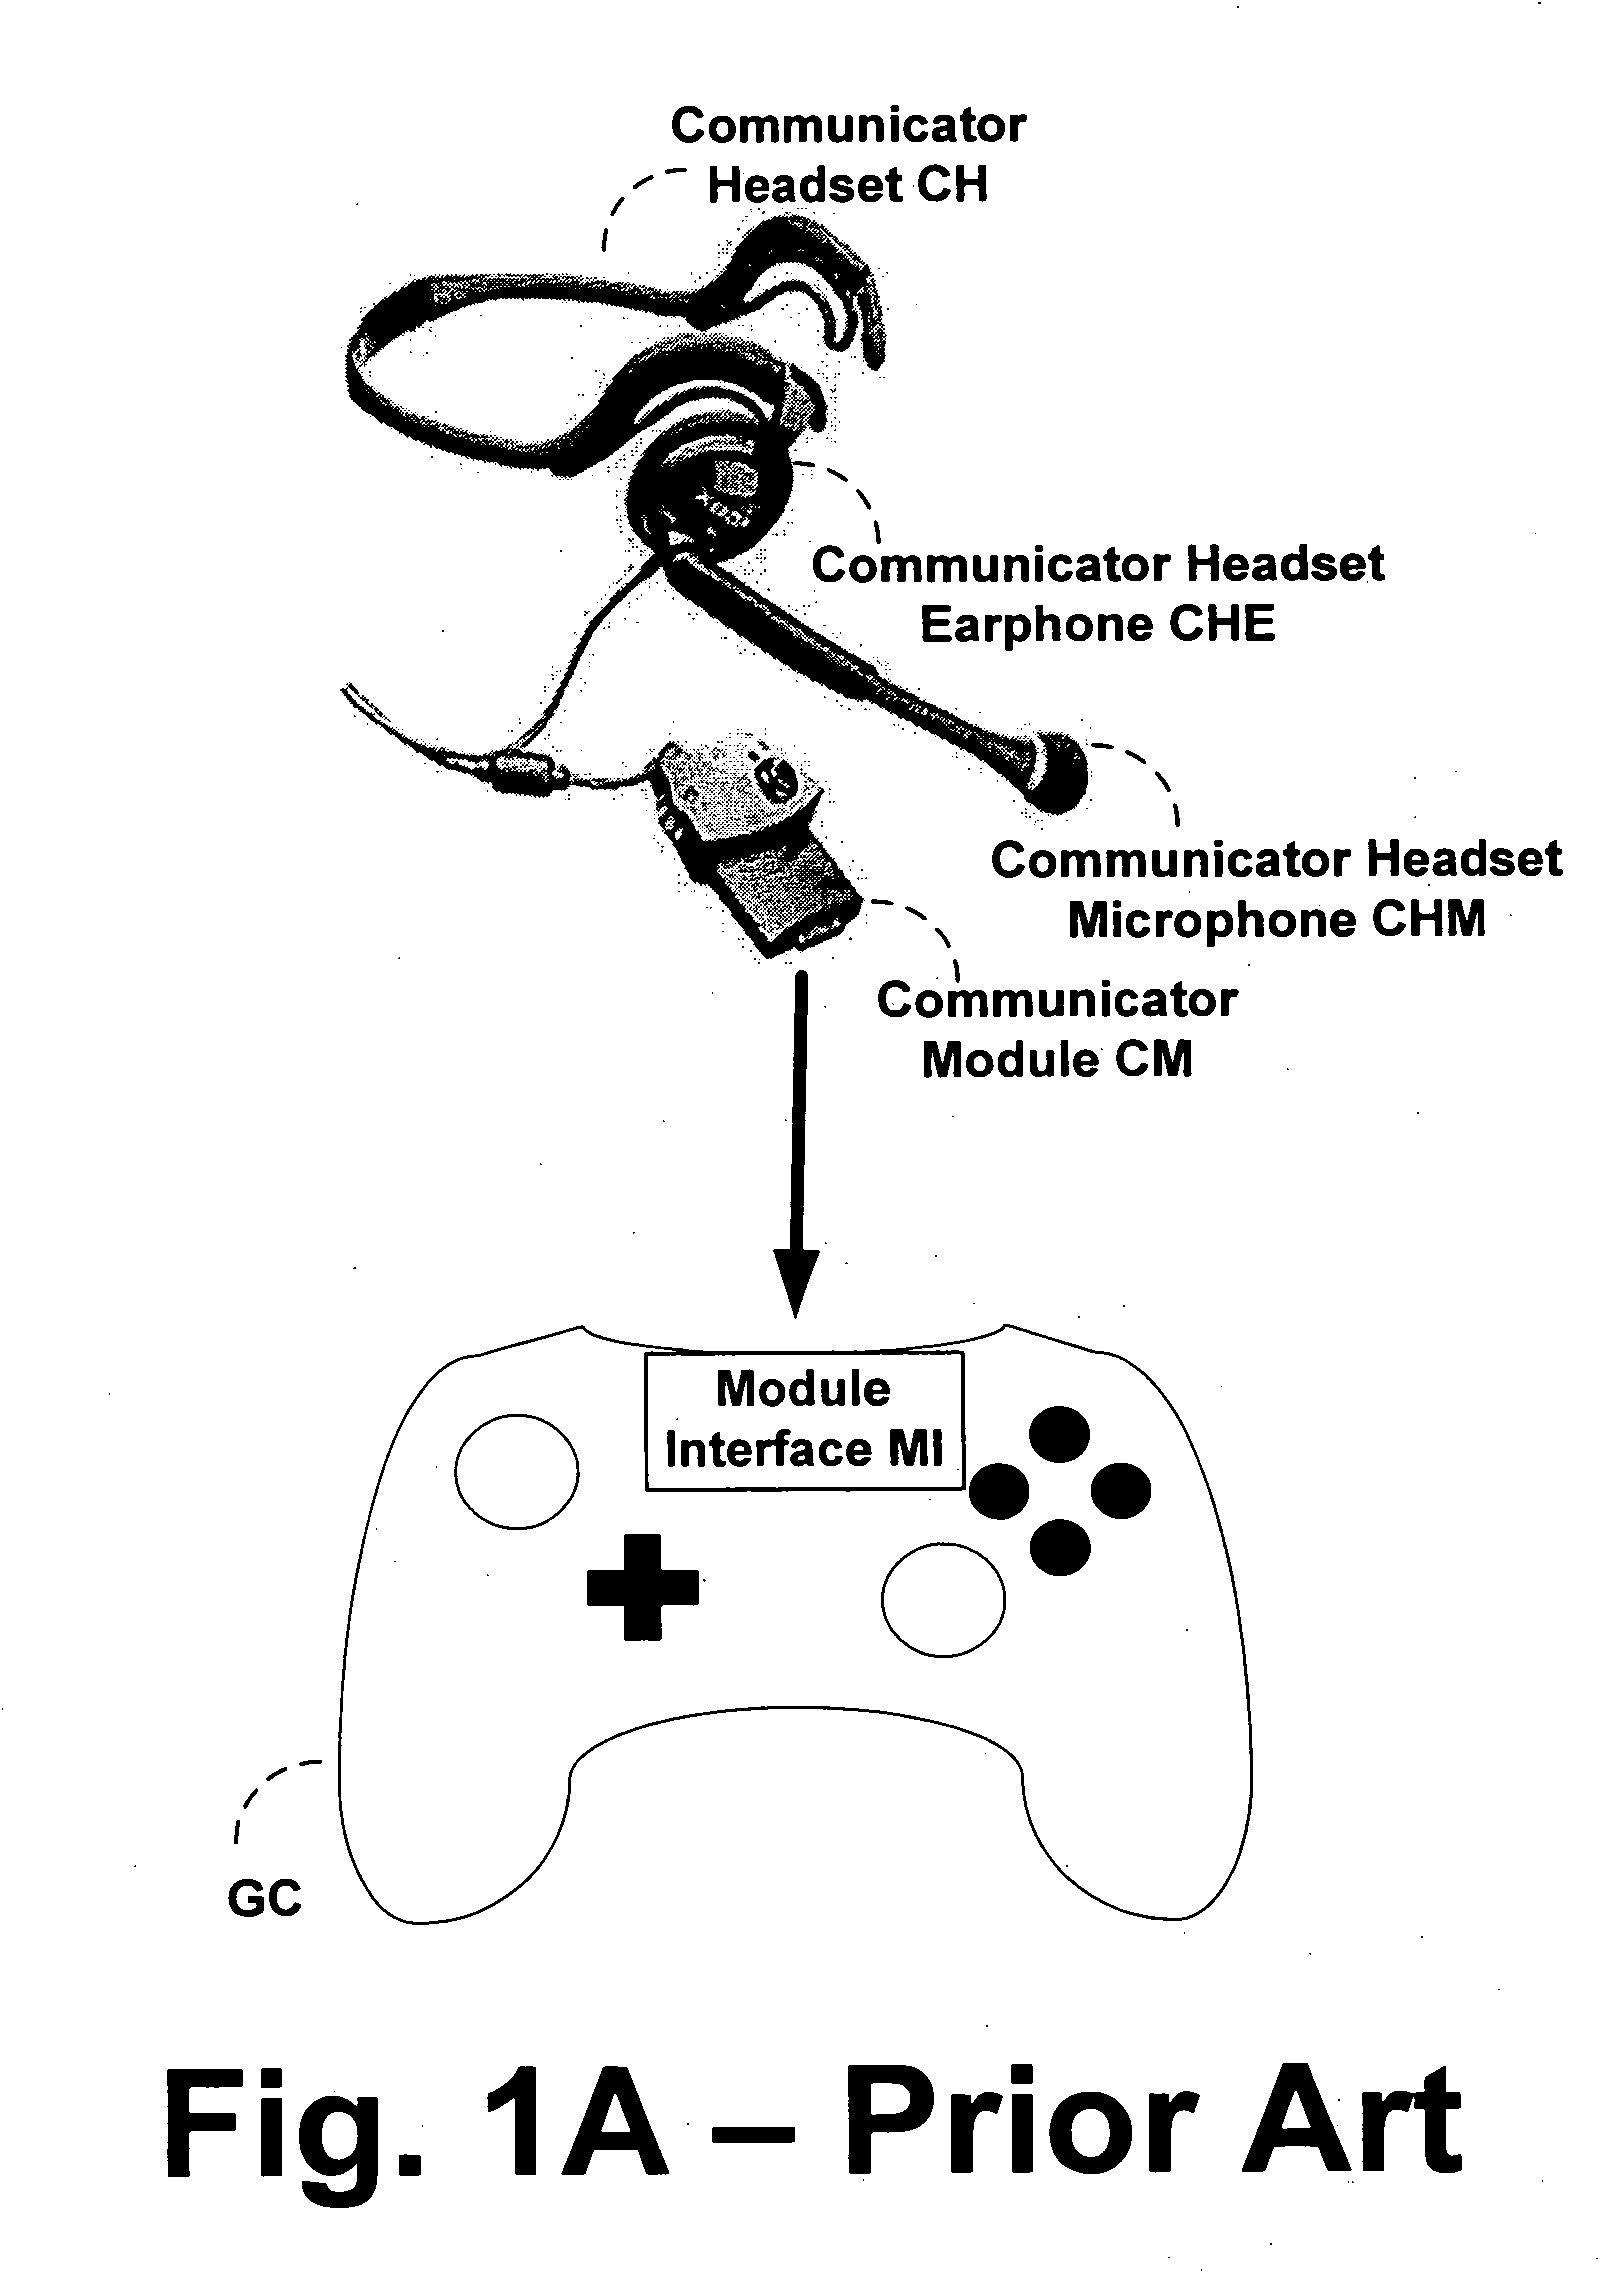 Voice input in a multimedia console environment